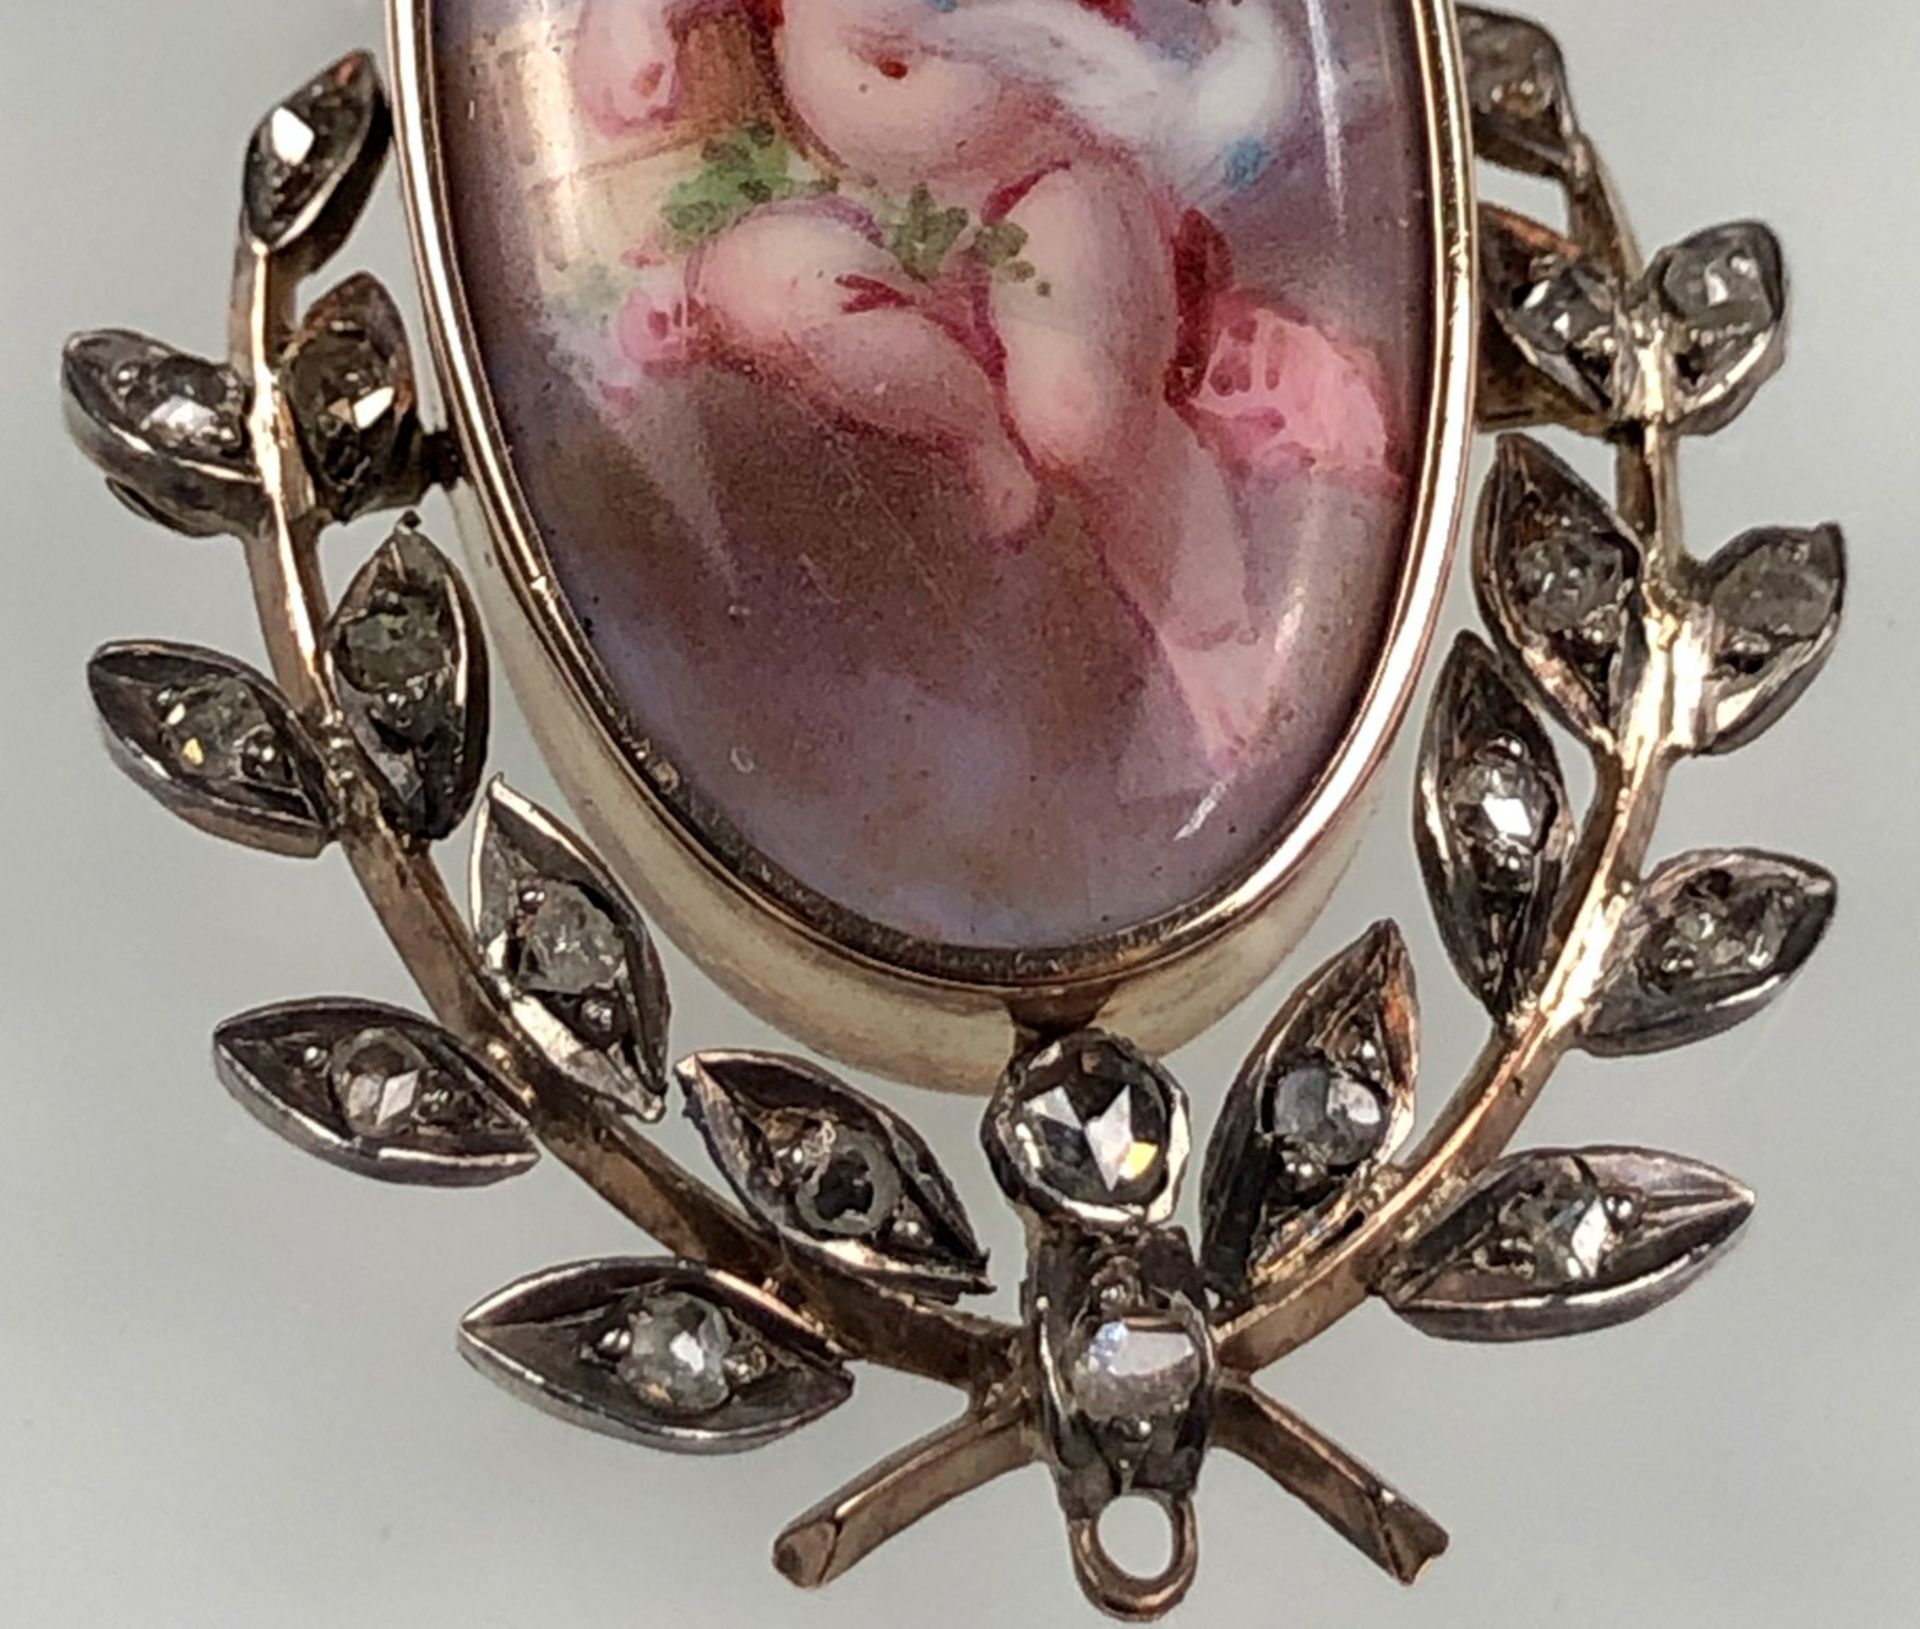 Pendant with porcelain painting in a gold frame with diamonds. - Image 6 of 8